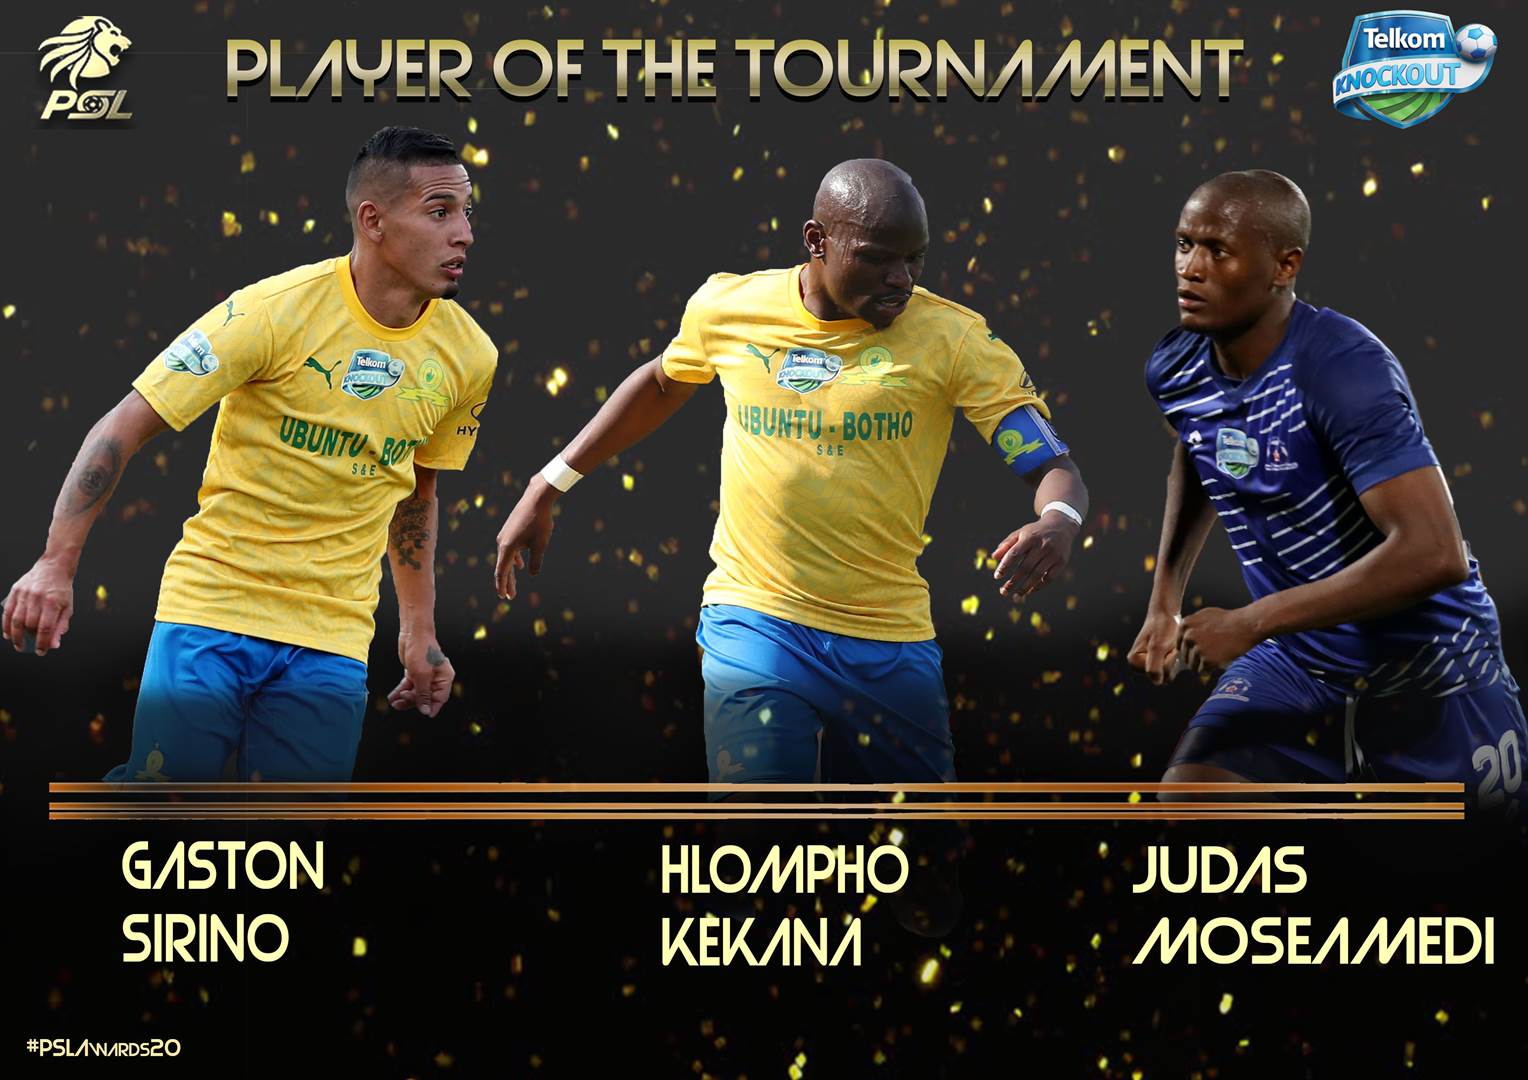 Telkom Knockout Player of the Tournament